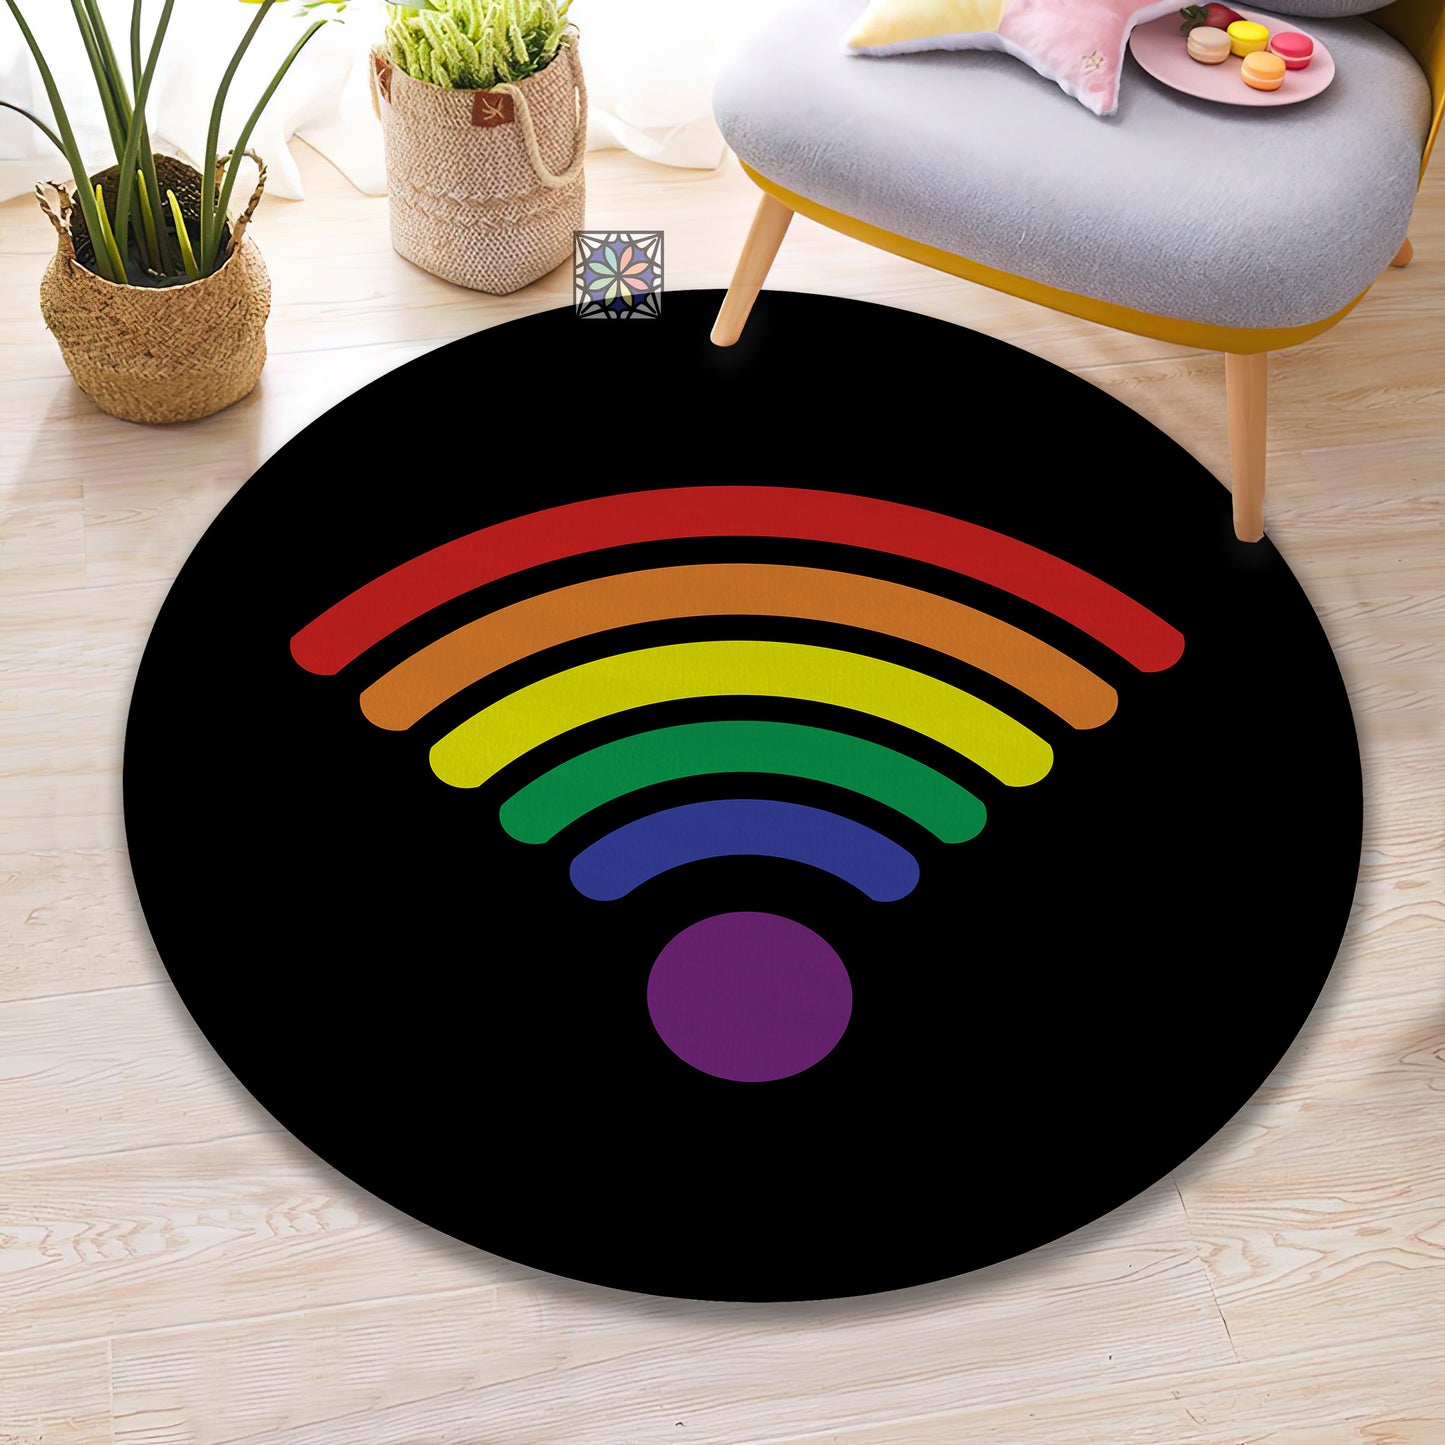 Wi-Fi Patterned Rainbow Rug, LGBT Pride Carpet, LGBT Round Mat, Teenage Room Decor Gift for Gay